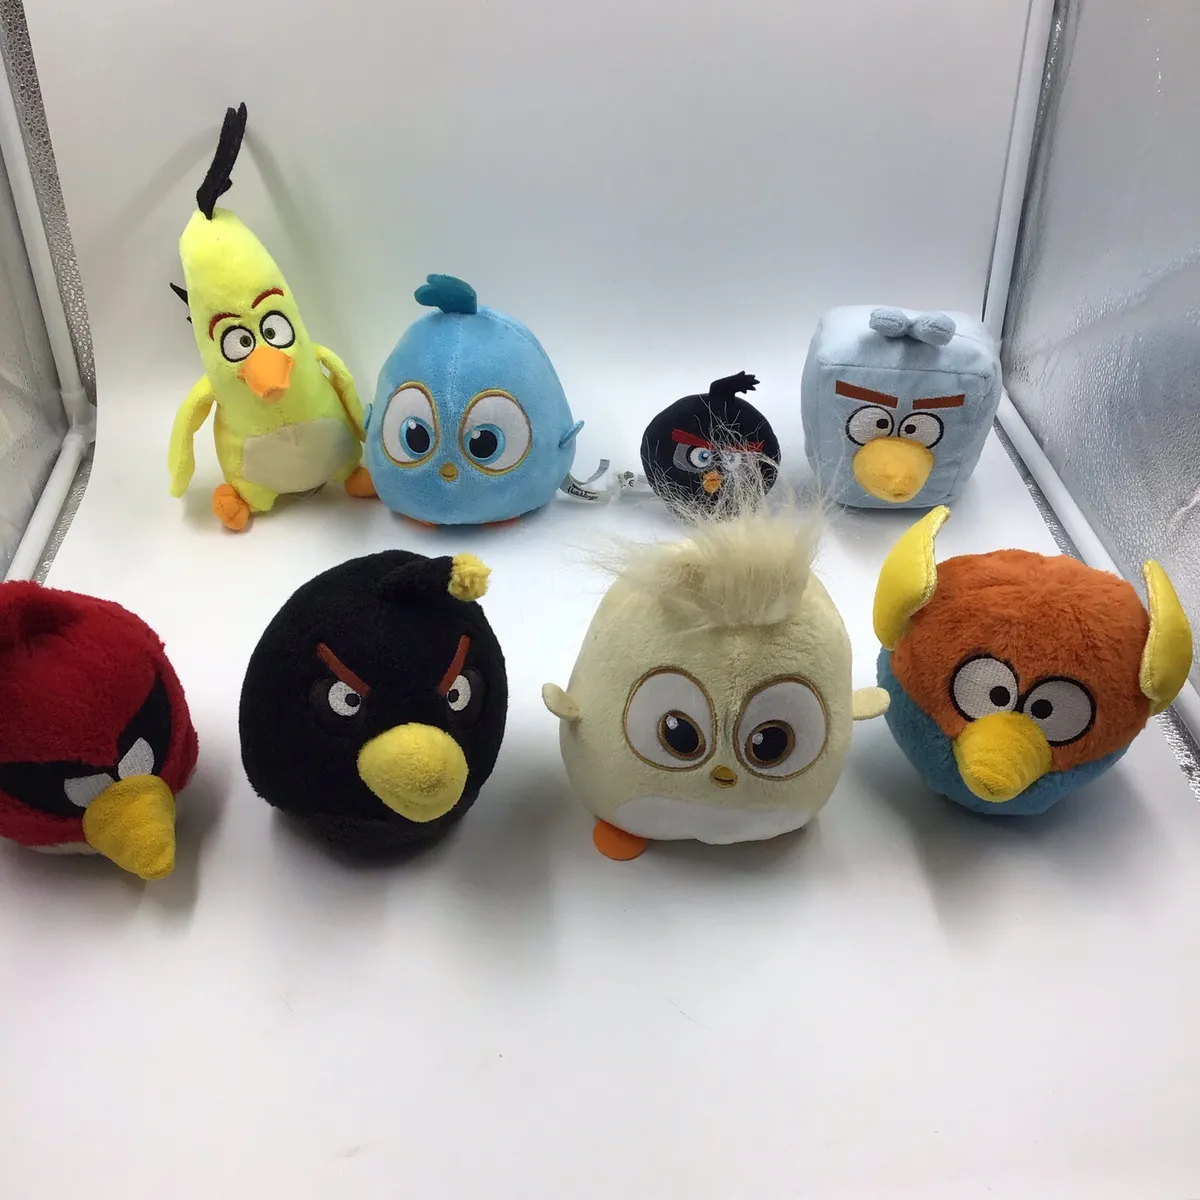 Explore the world of Angry Birds plush toys